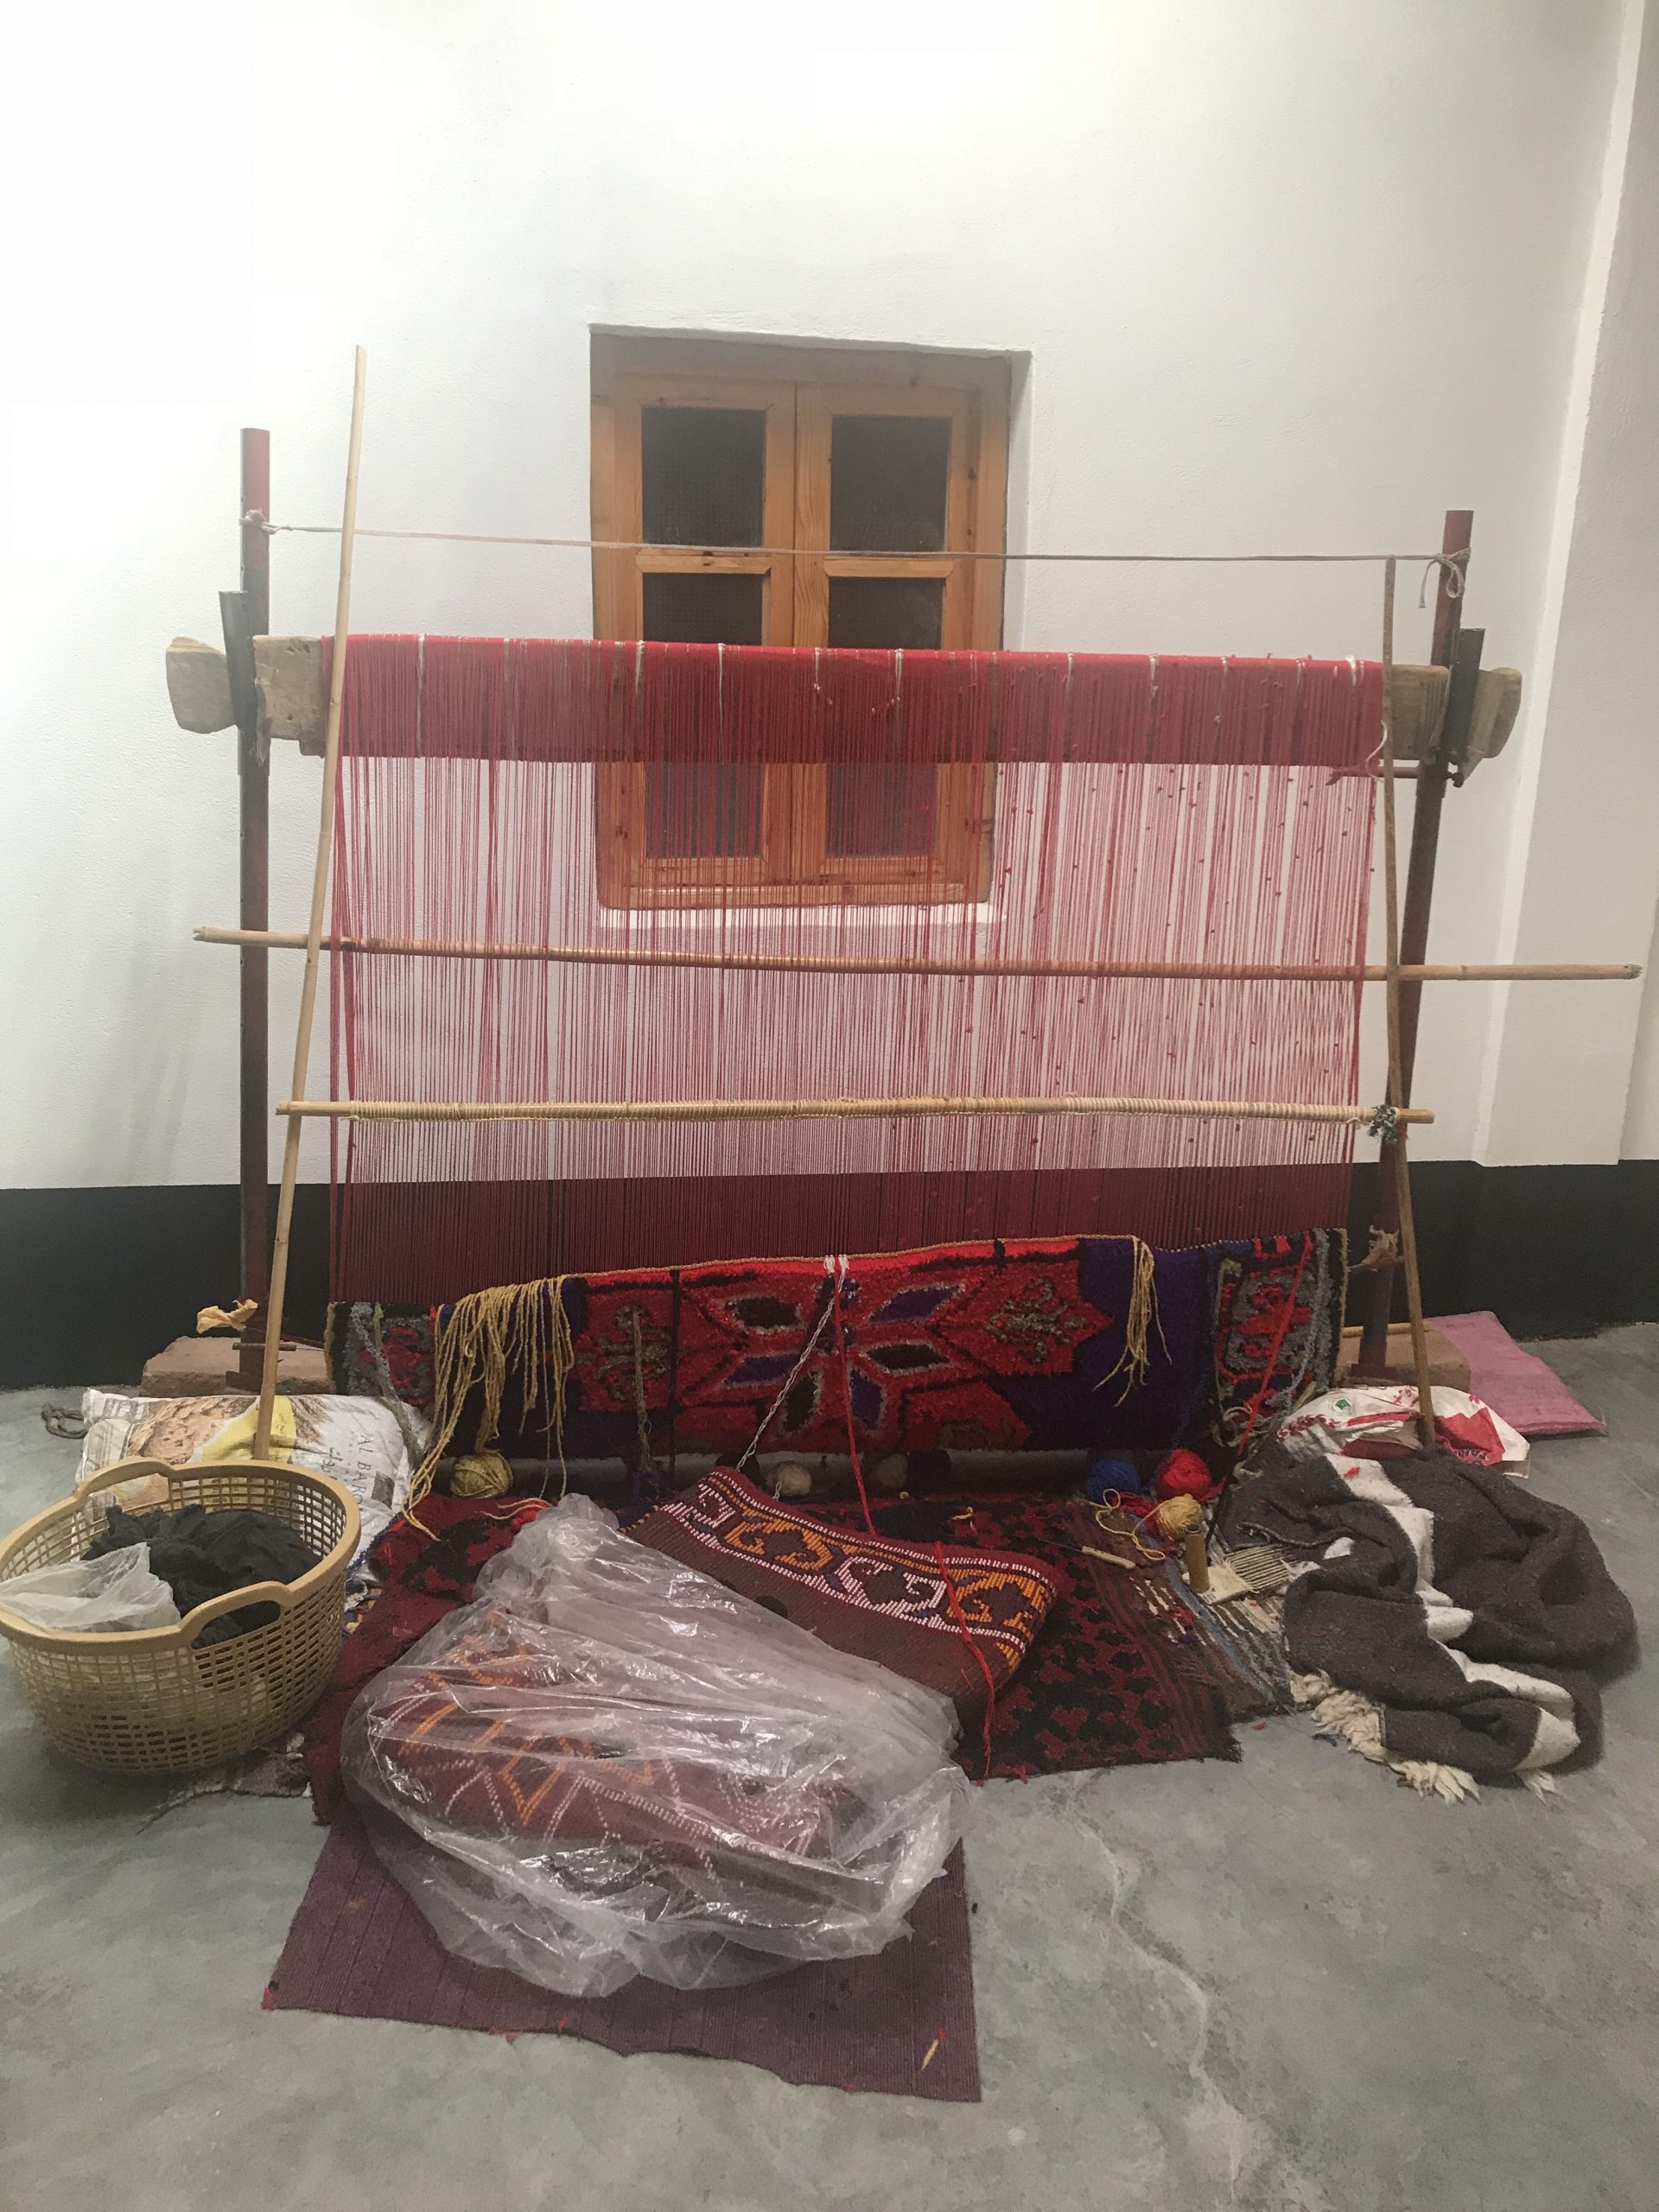 gallery image for Private Carpet Weaving Workshop  Marrakech